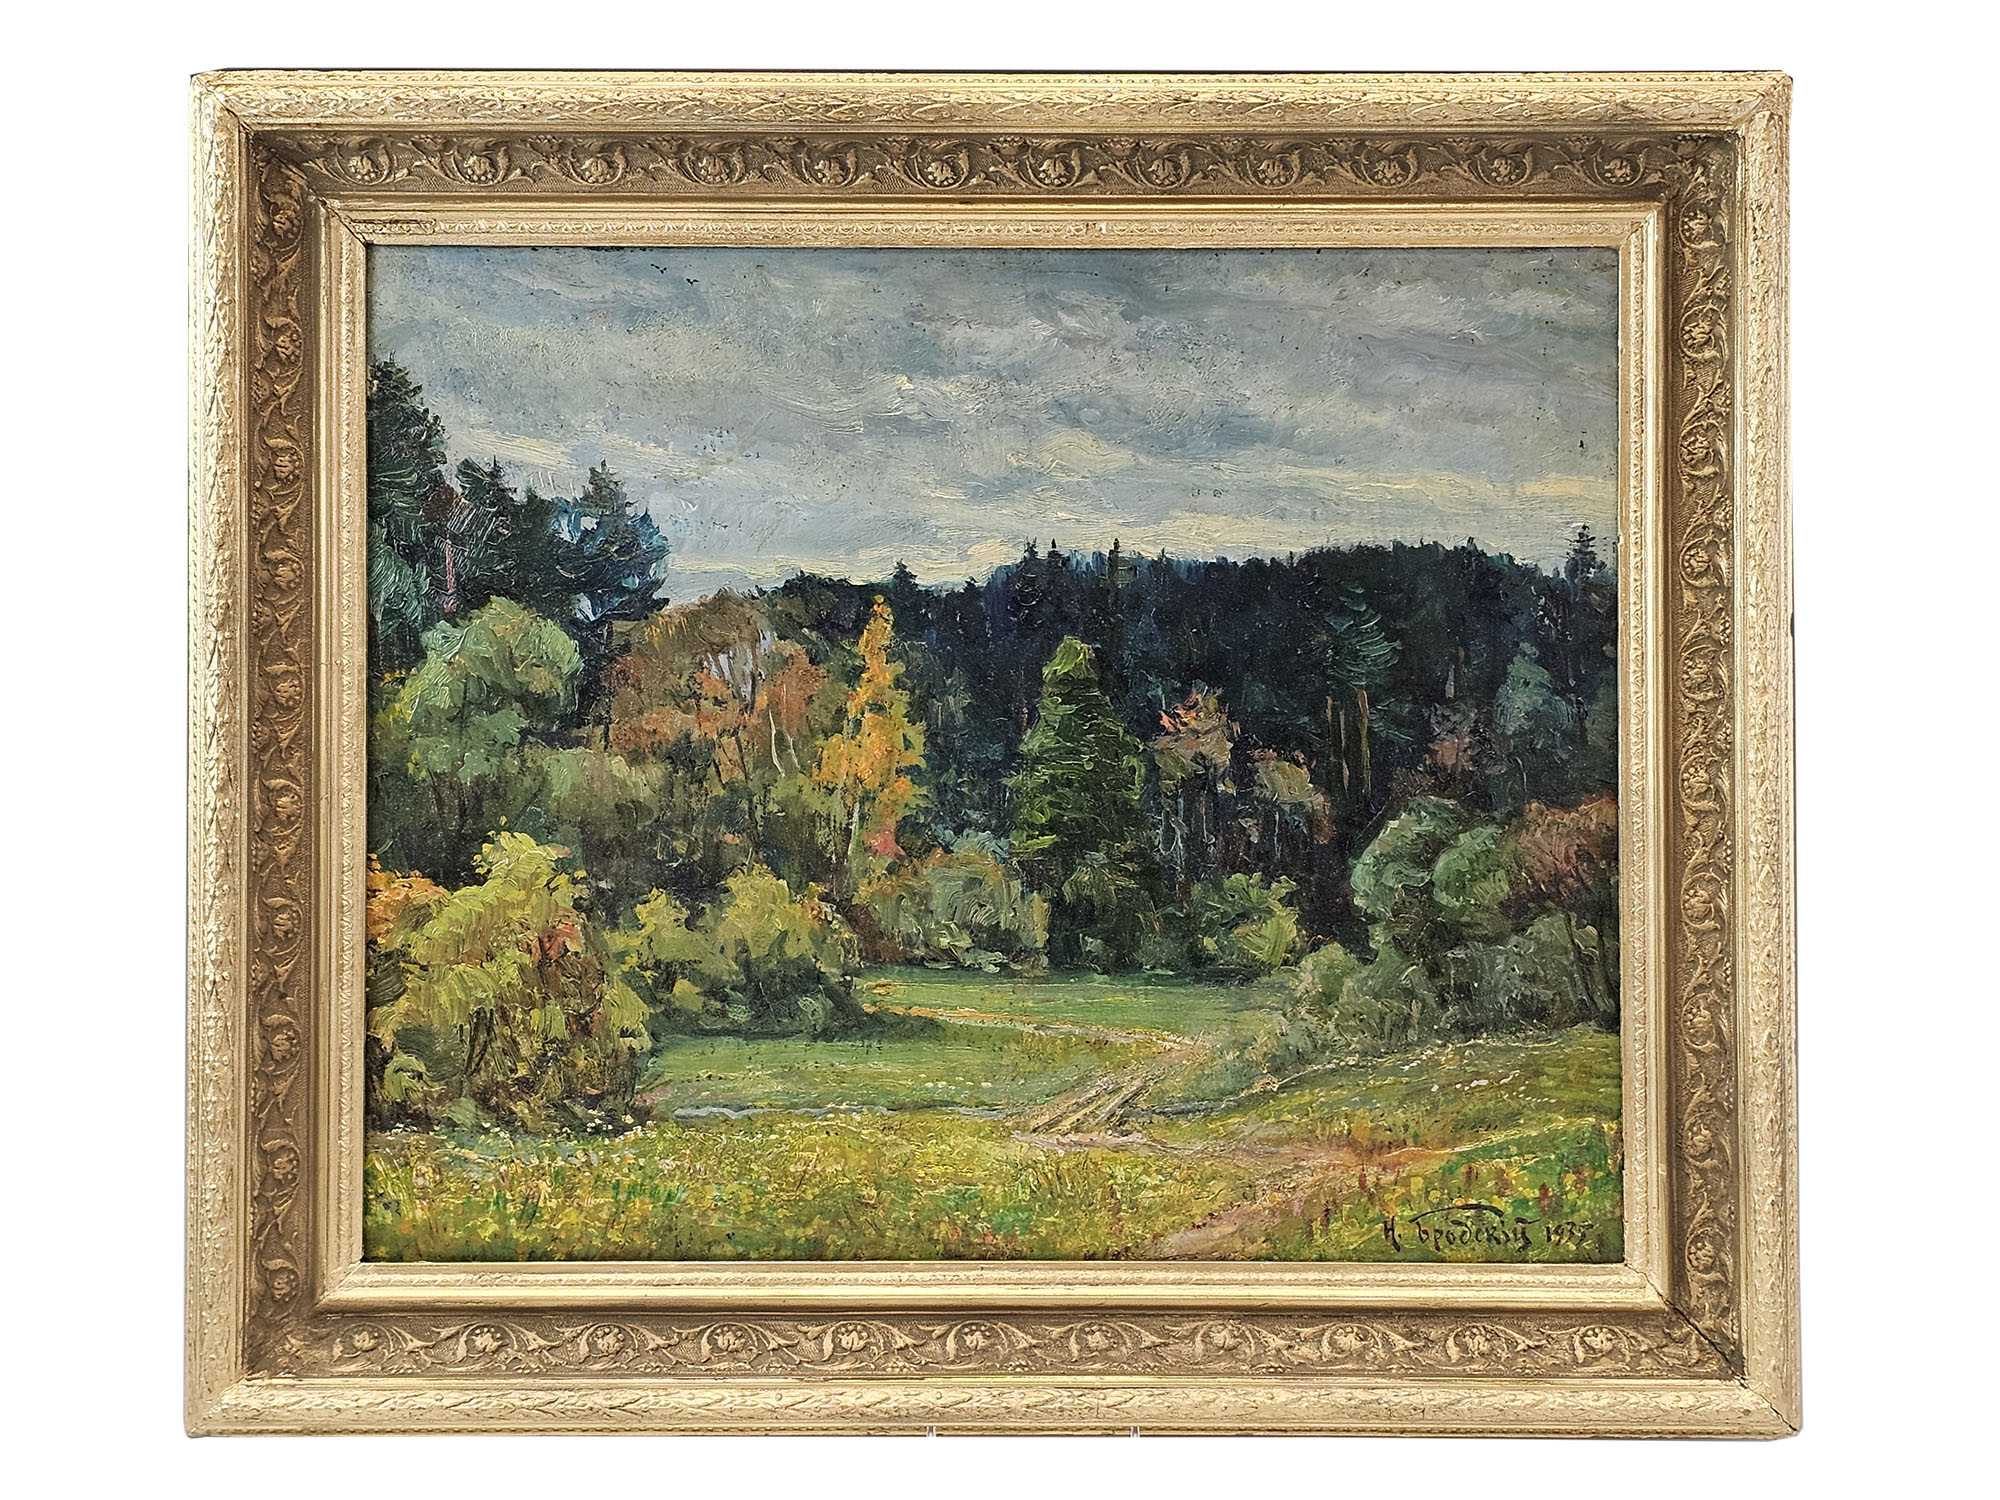 RUSSIAN LANDSCAPE OIL PAINTING BY ISAAK BRODSKY PIC-0